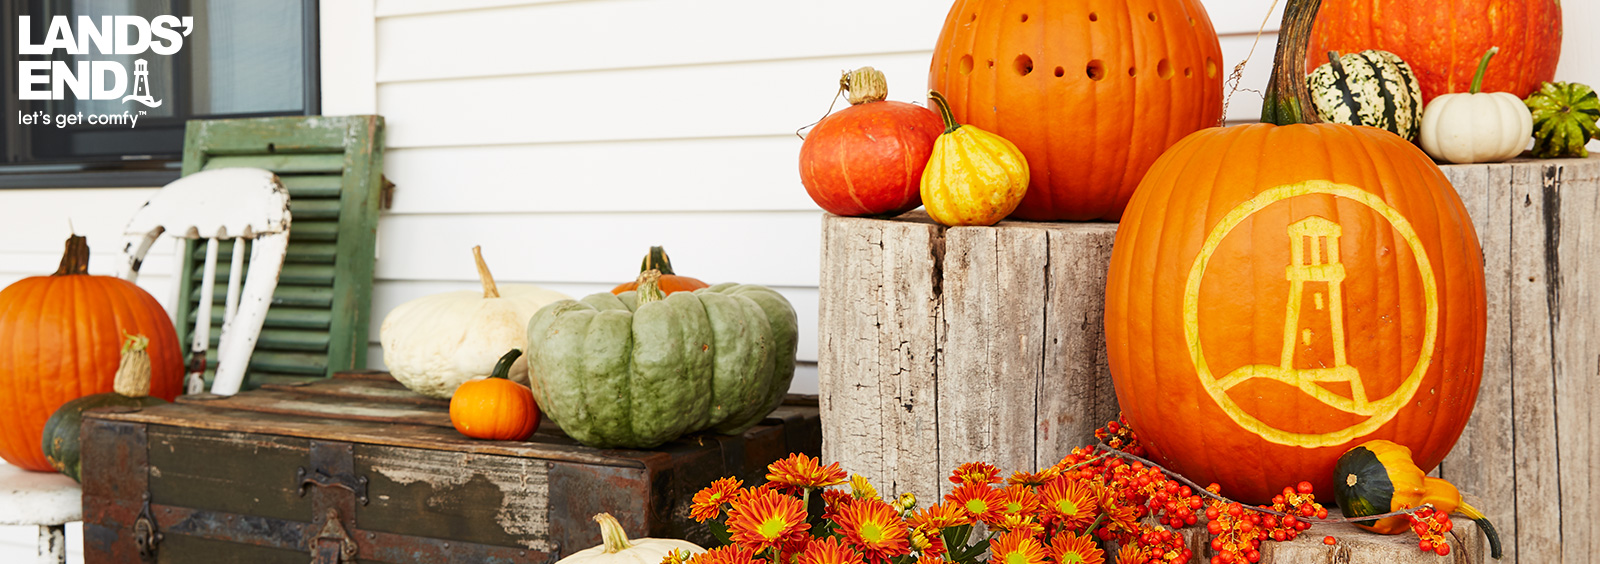 3 Fun Fall Projects for the Family | Lands' End